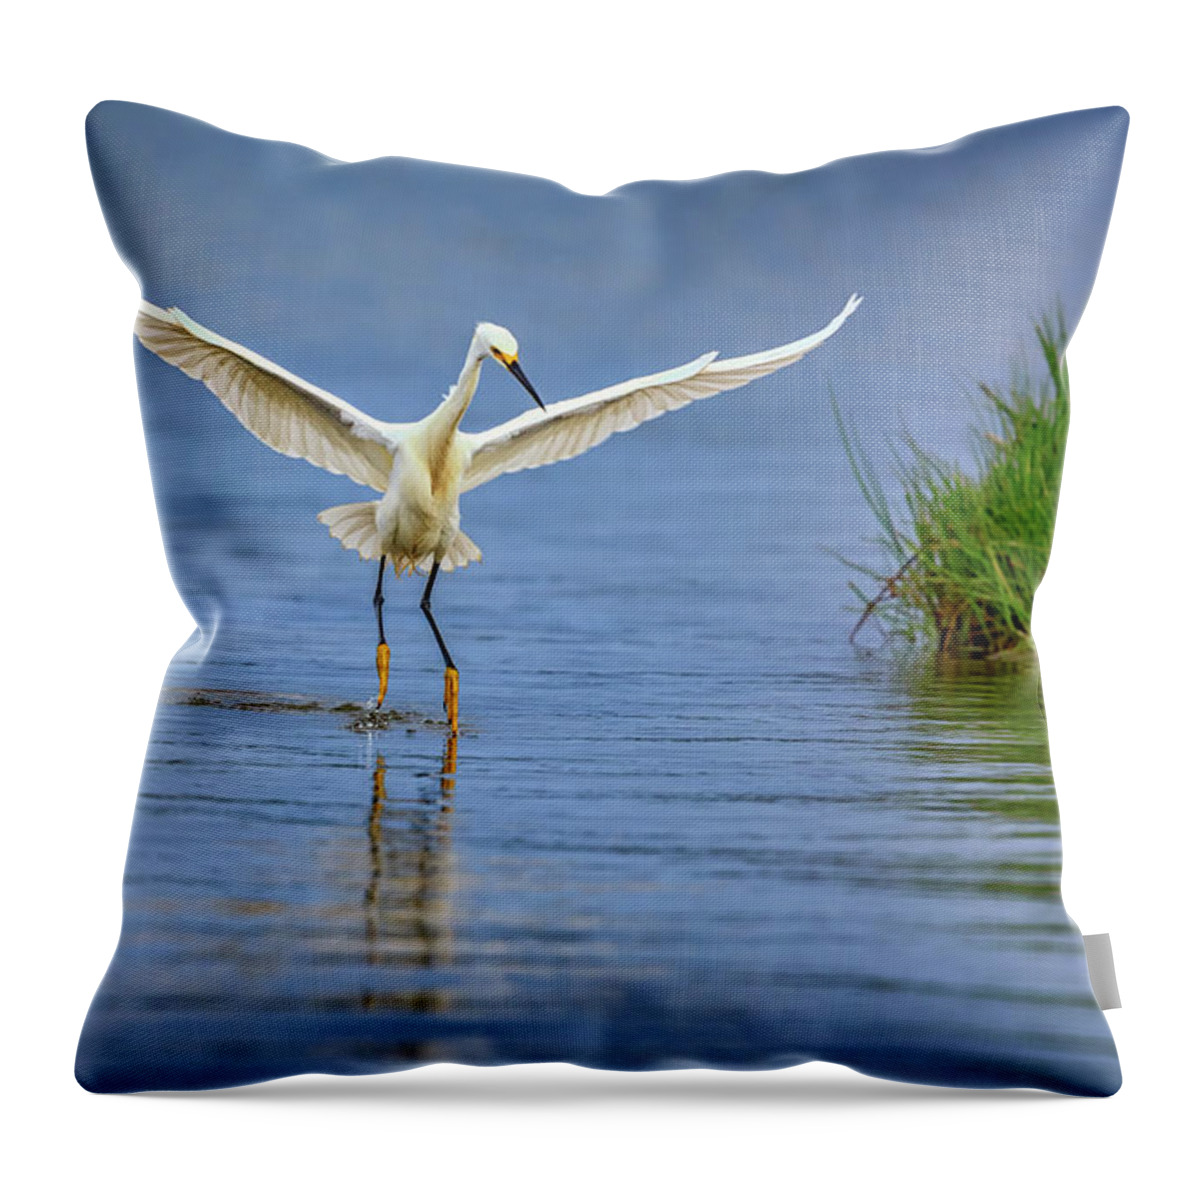 Snowy Egret Throw Pillow featuring the photograph A Snowy Egret Dip-Fishing by Rick Berk